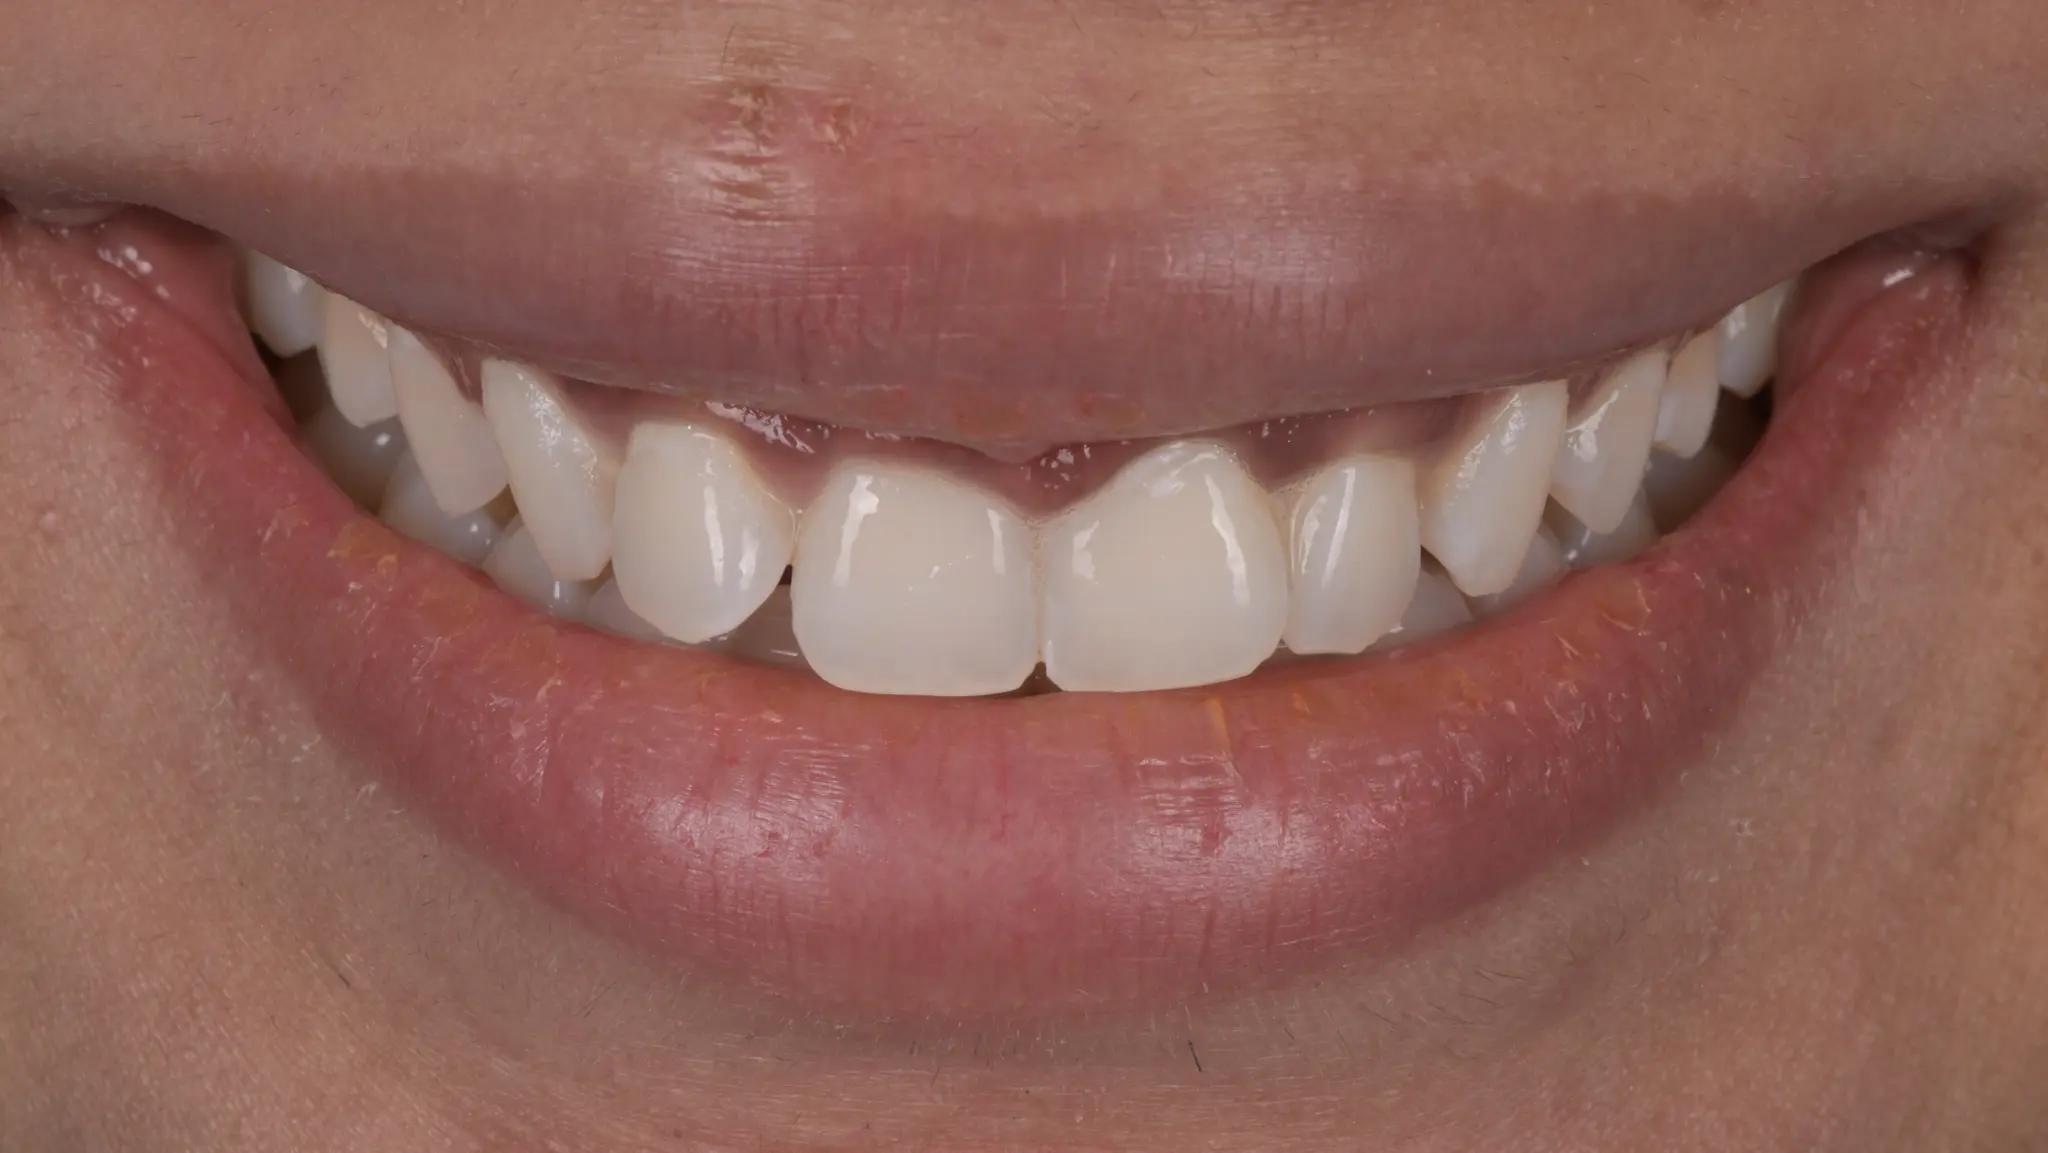 Sparkling teeth after bleaching at Spectrum Advance Dental Cate